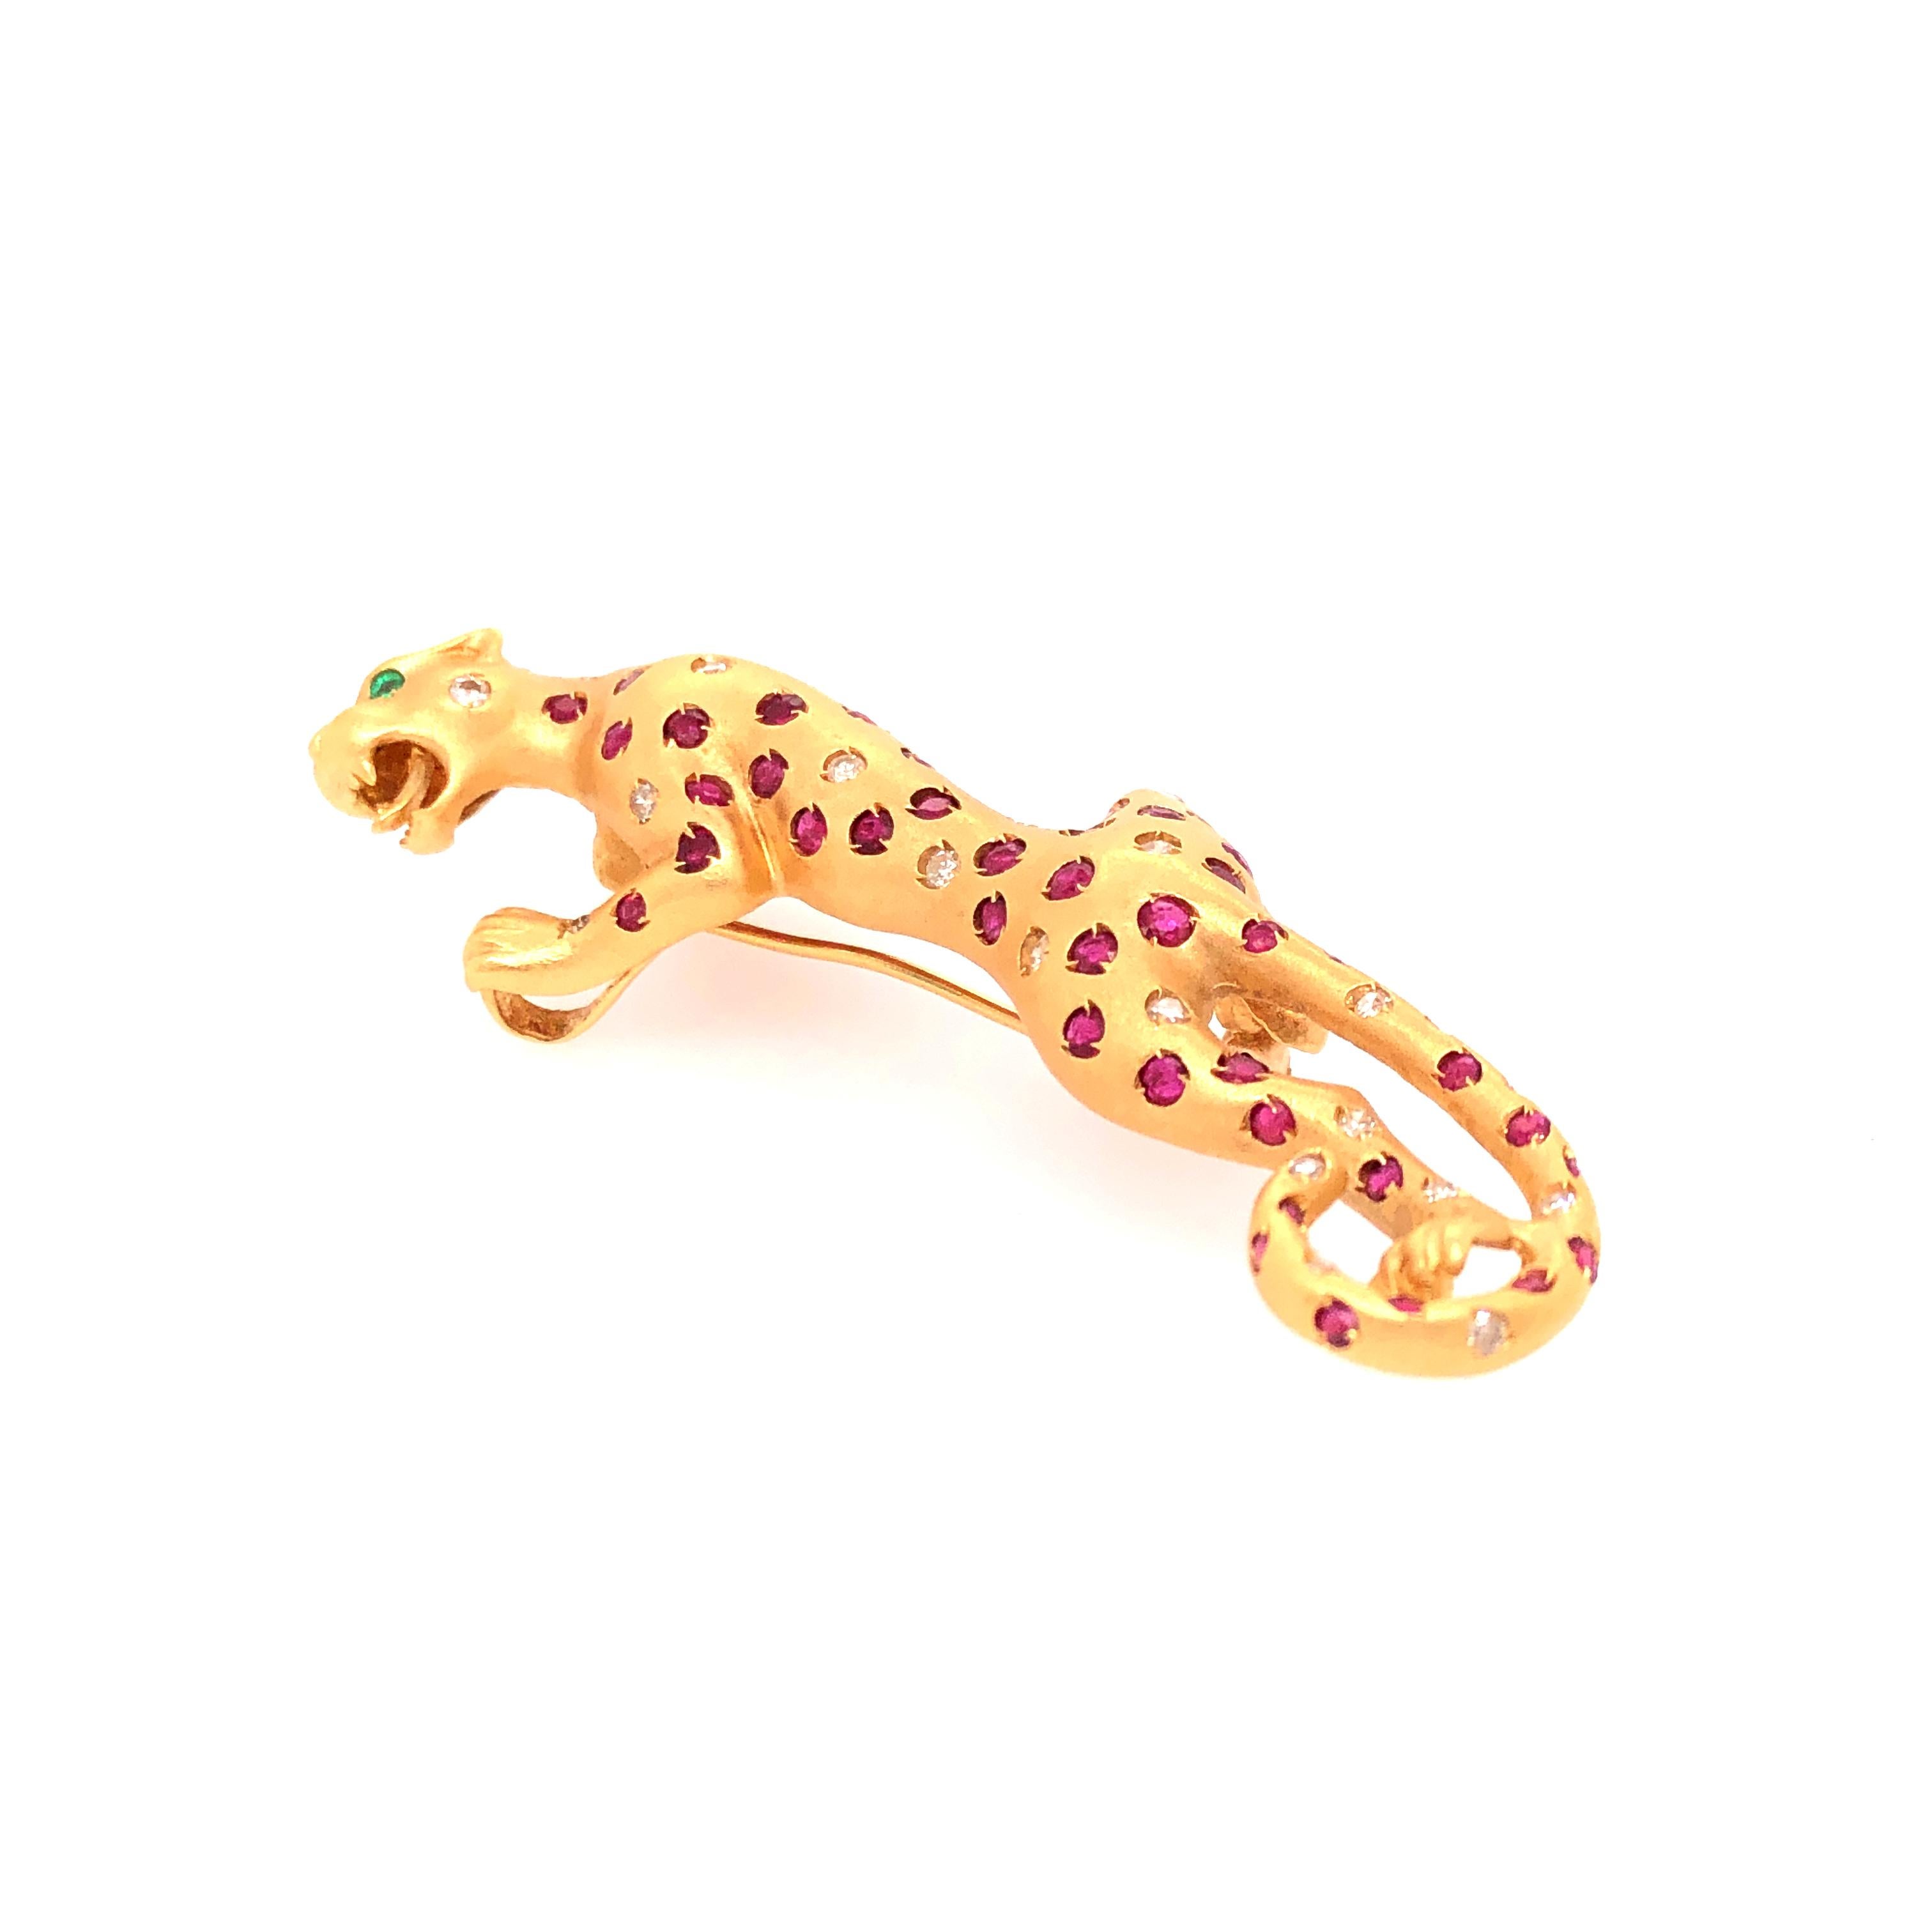 Beautifully sculpted this graceful jaguar can either be worn as a pin or pendant. 1.5mm - 2mm rubies and diamonds make the jaguar's spots. and approximately 1mm emeralds are its eyes. 

From the Skibell Estate Collection

Stamped: 18K, D, 750